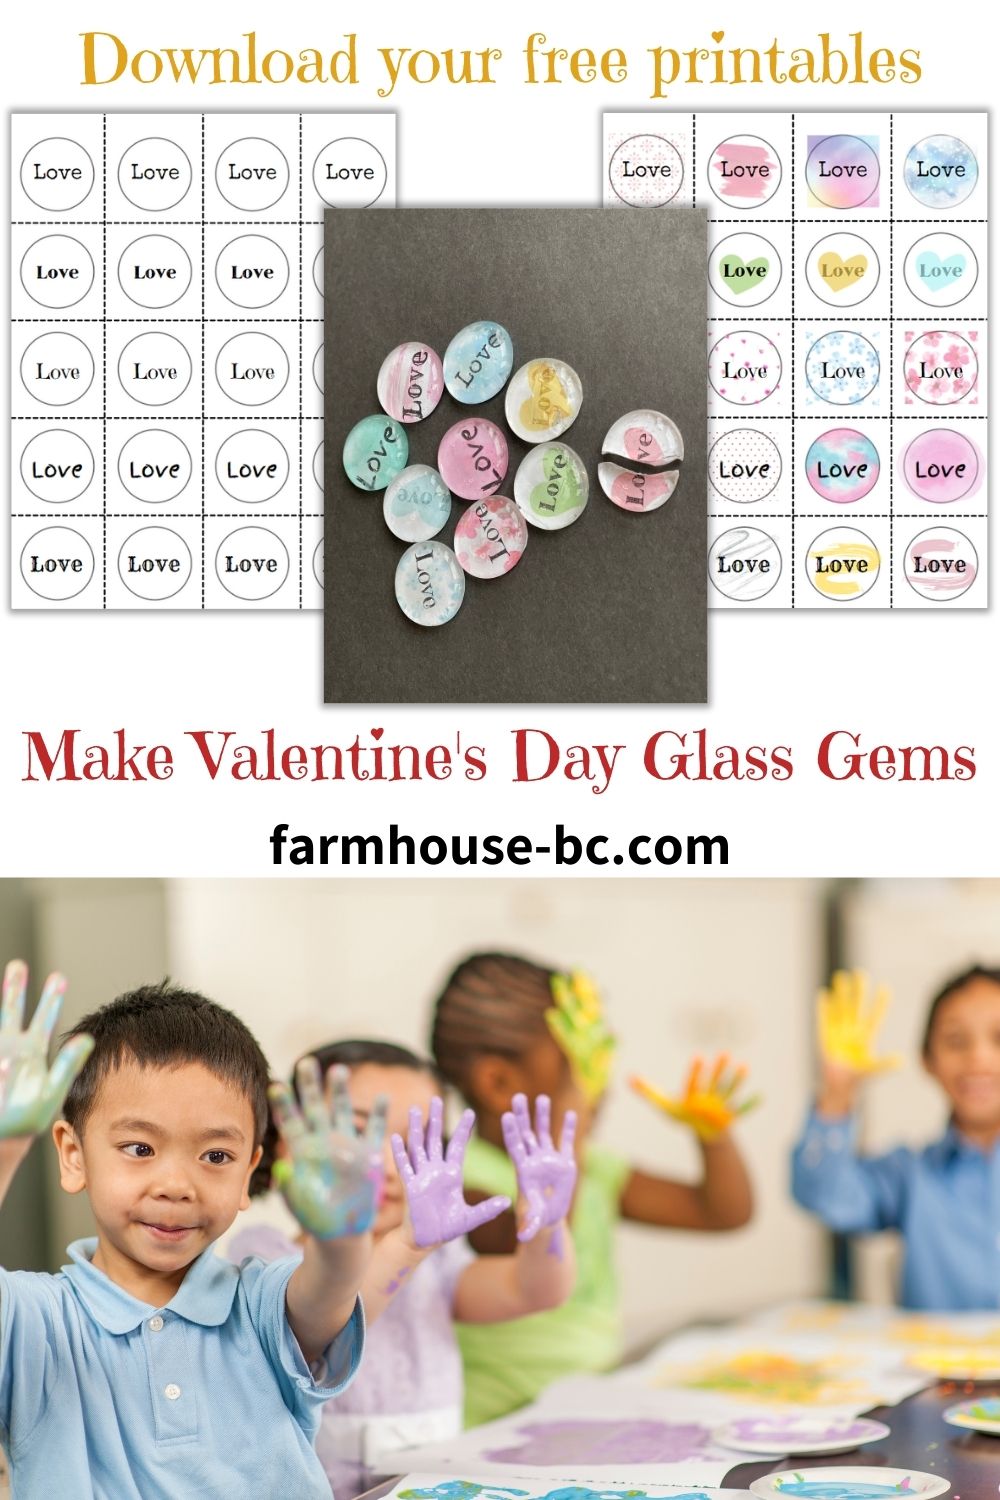 Valentines Day love gems for a fun DIY gift for your loved one